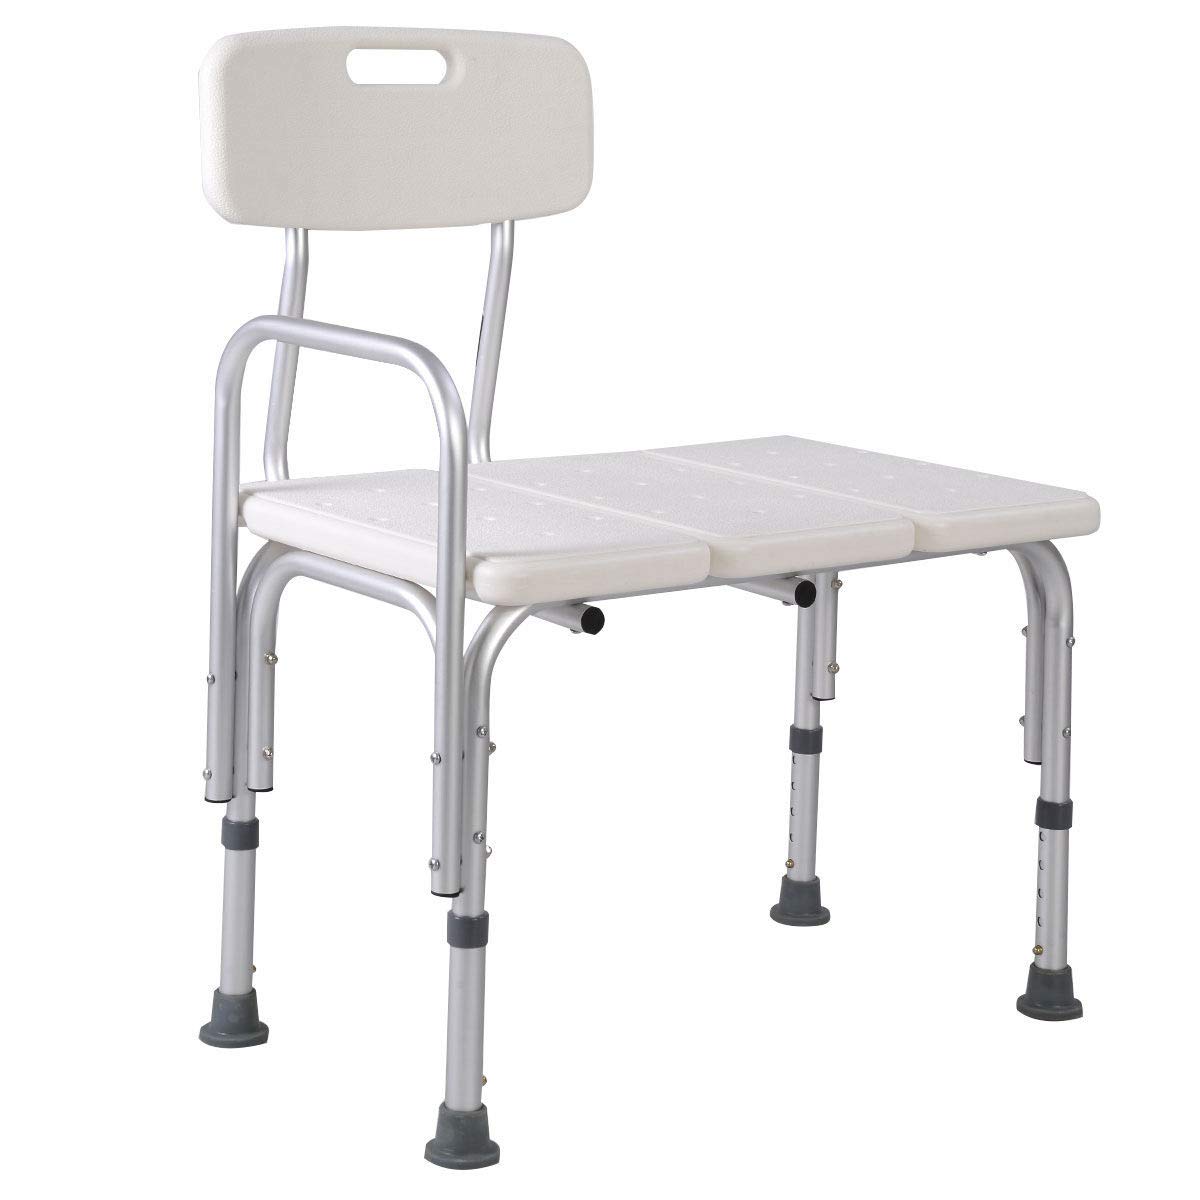 MedMobile® Bathtub Transfer Bench/Bath Chair with Back, Wide SEAT, Adjustable SEAT Height, Sure-GRIPED Legs, Lightweight, Durable, Rust-Resistant Shower Bench